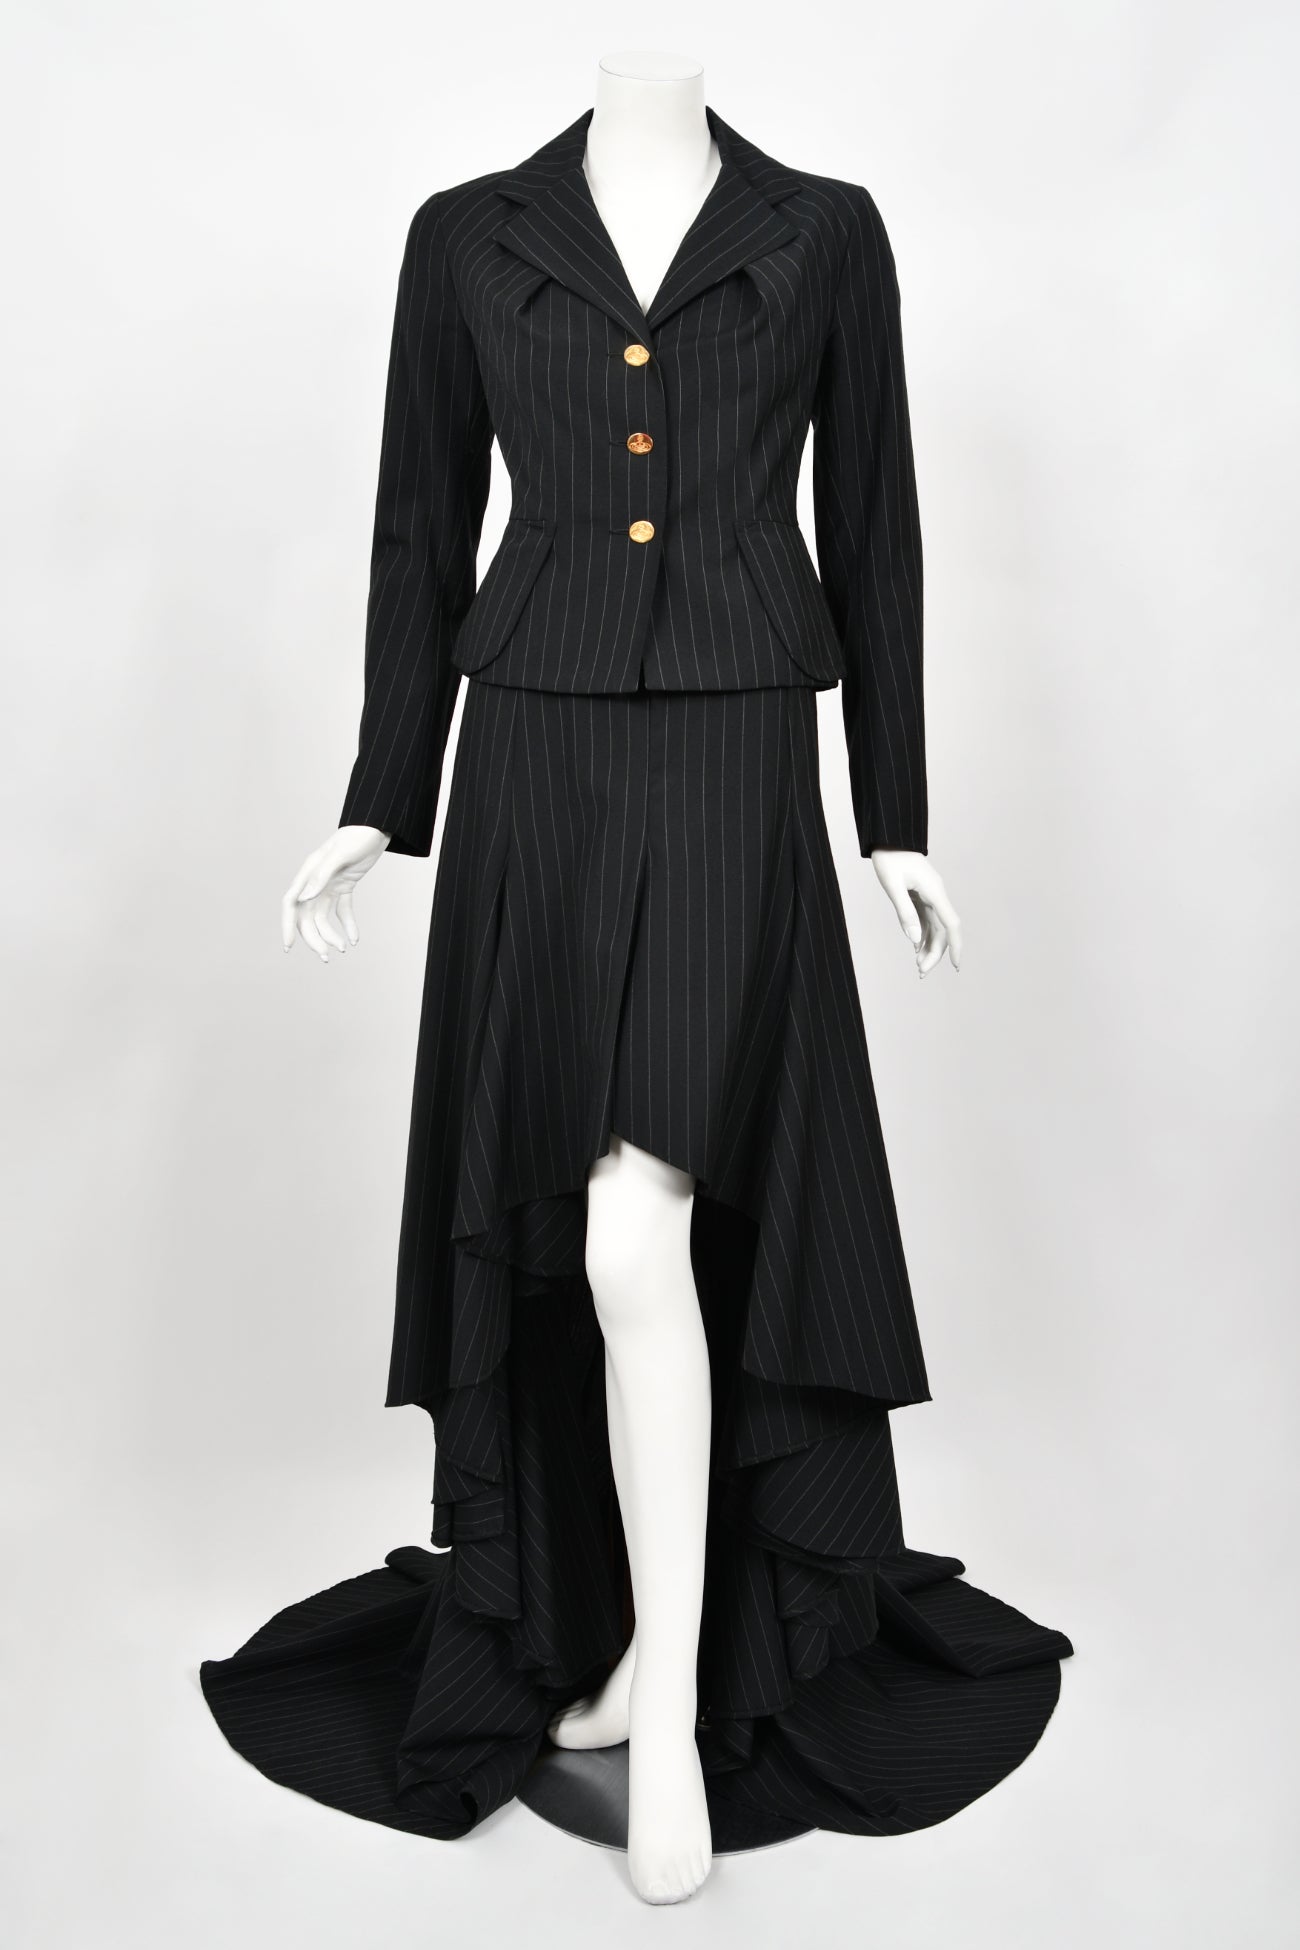 Archival 1994 Vivienne Westwood Pinstripe Wool Jacket and High-Low Trained Skirt For Sale 10